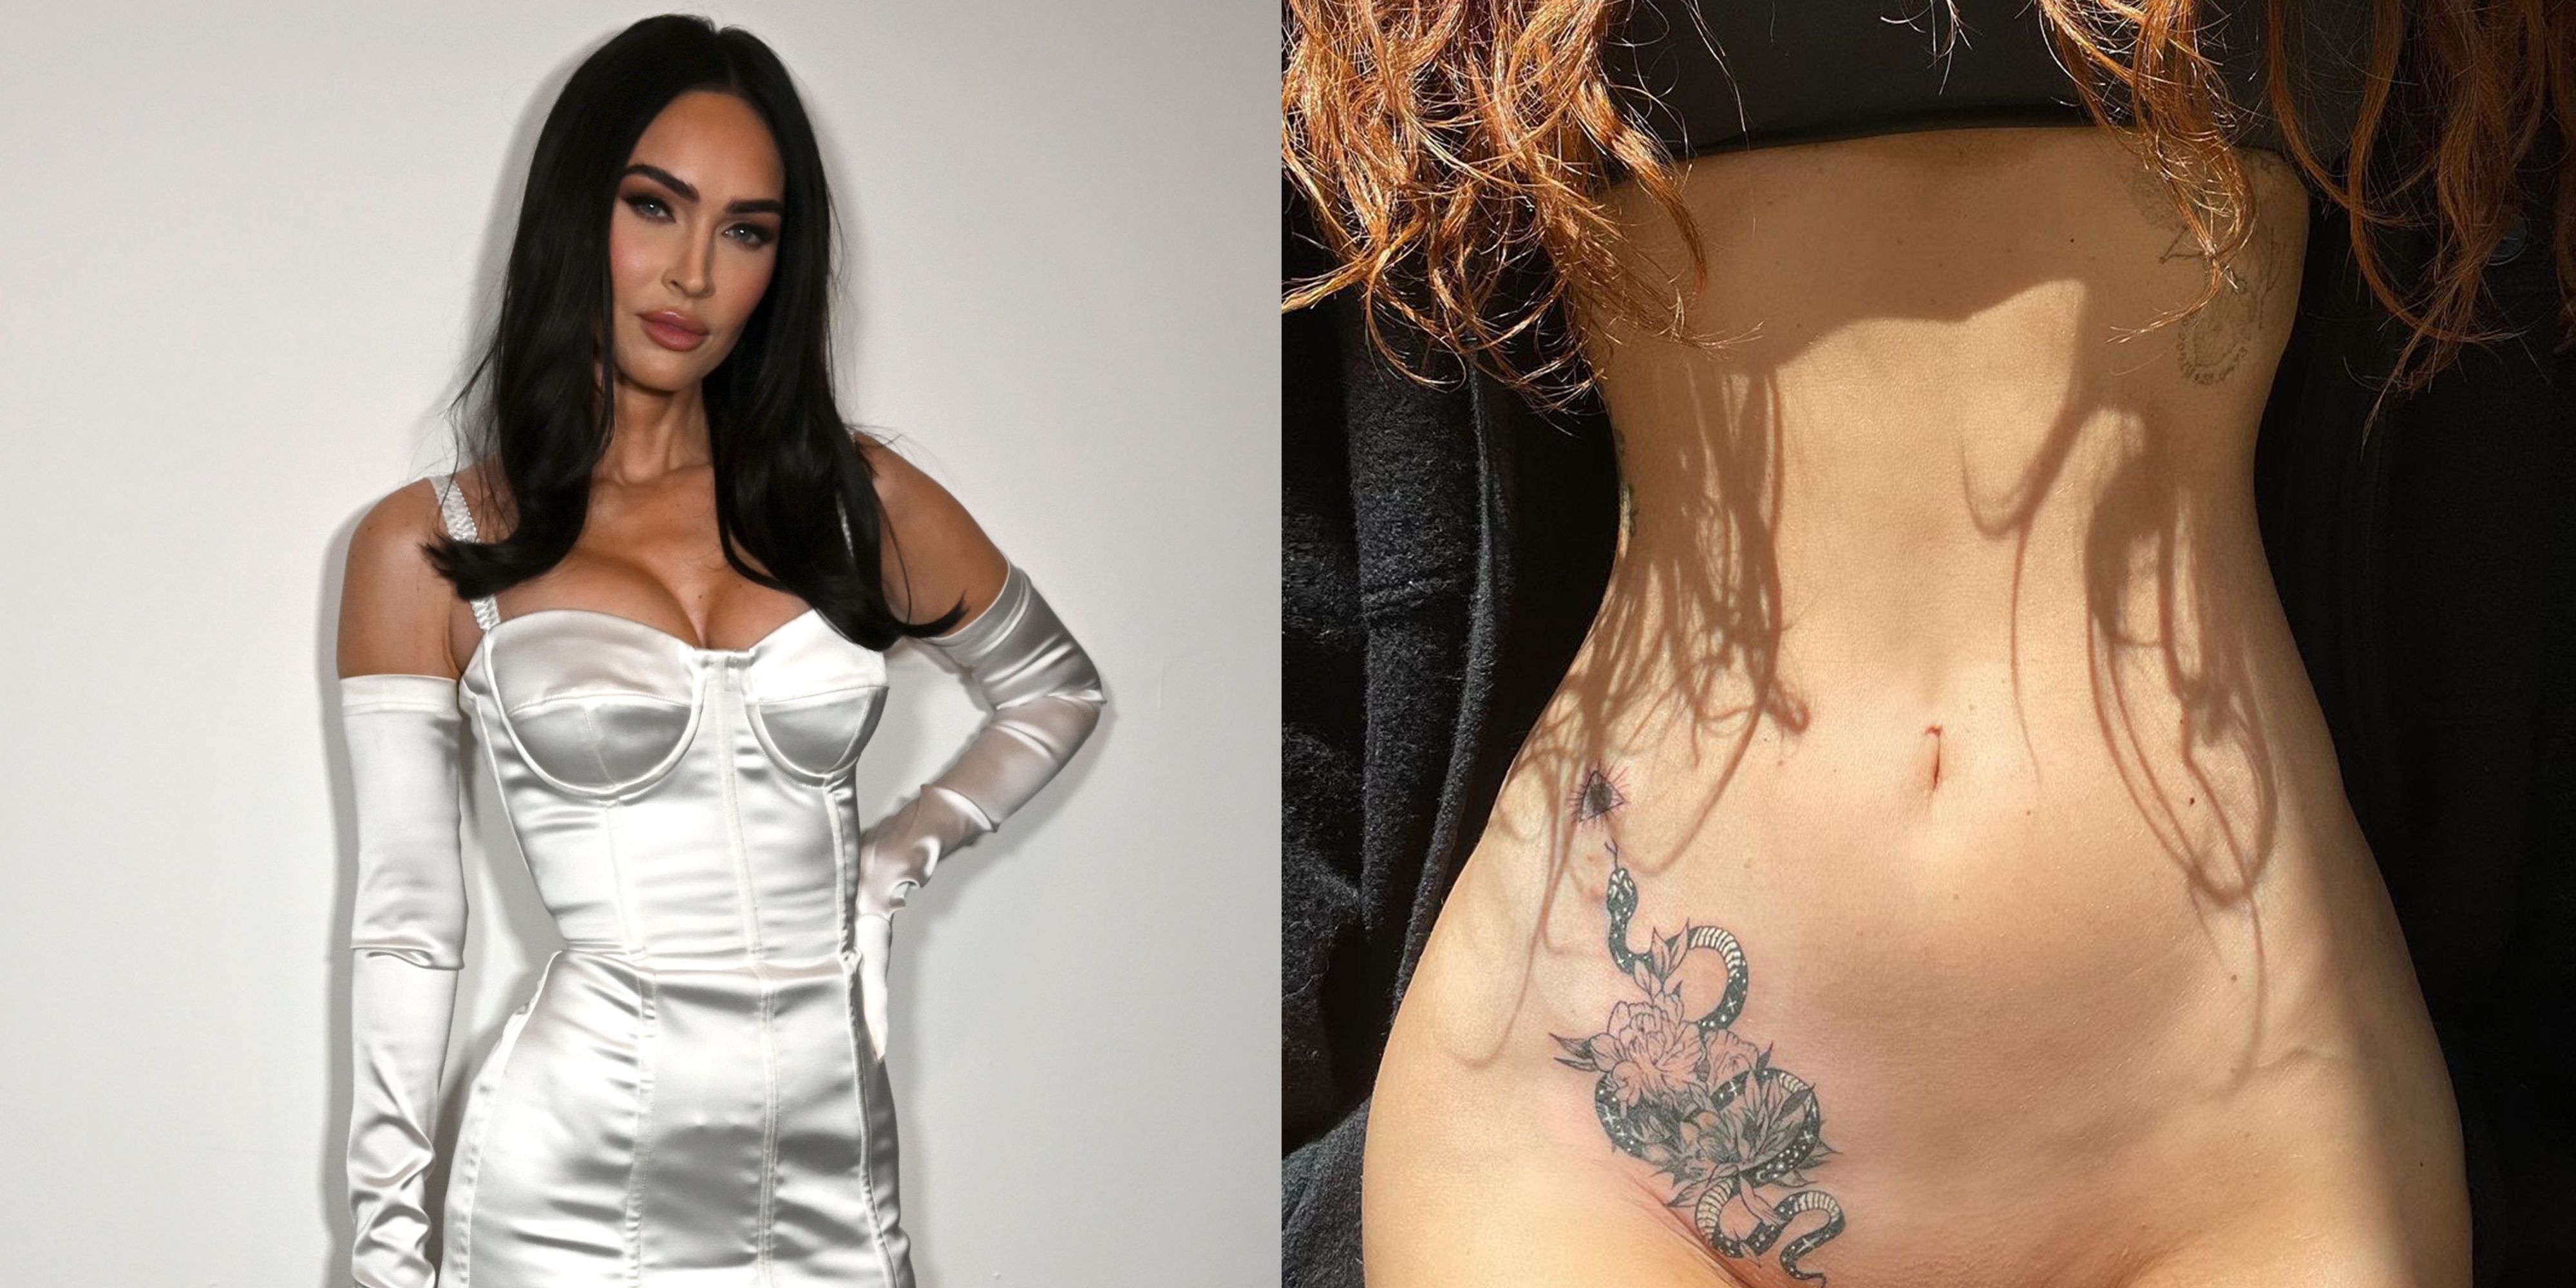 Megan Fox Just Debuted Dainty Finger Tattoos and a Spiderweb Chrome Manicure